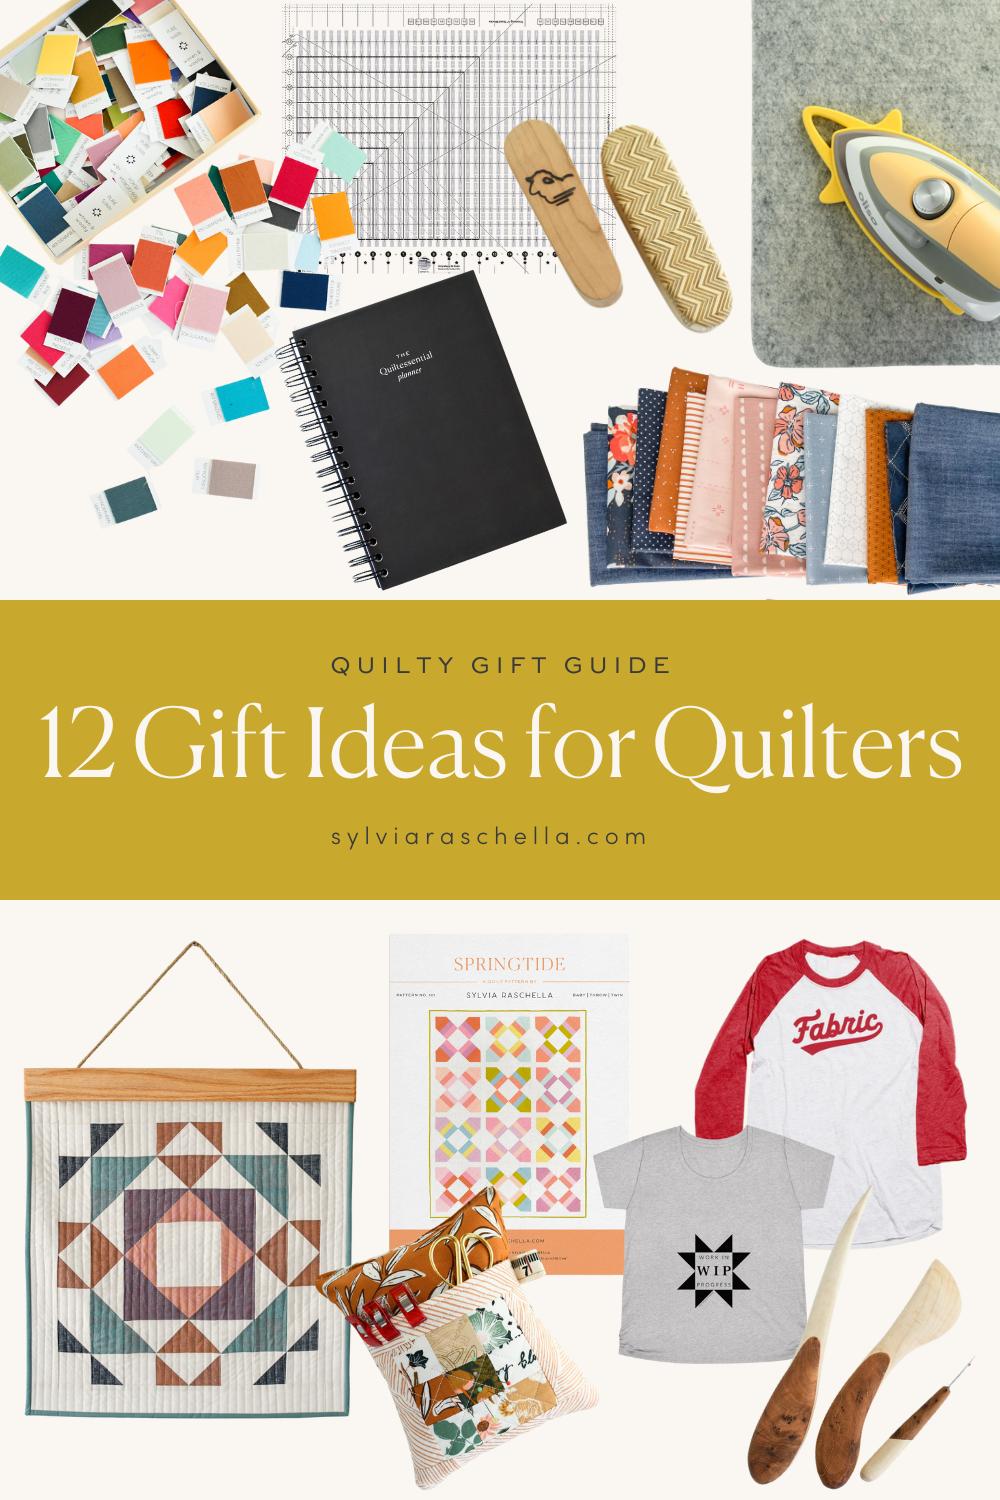 Gifts for Quilters 